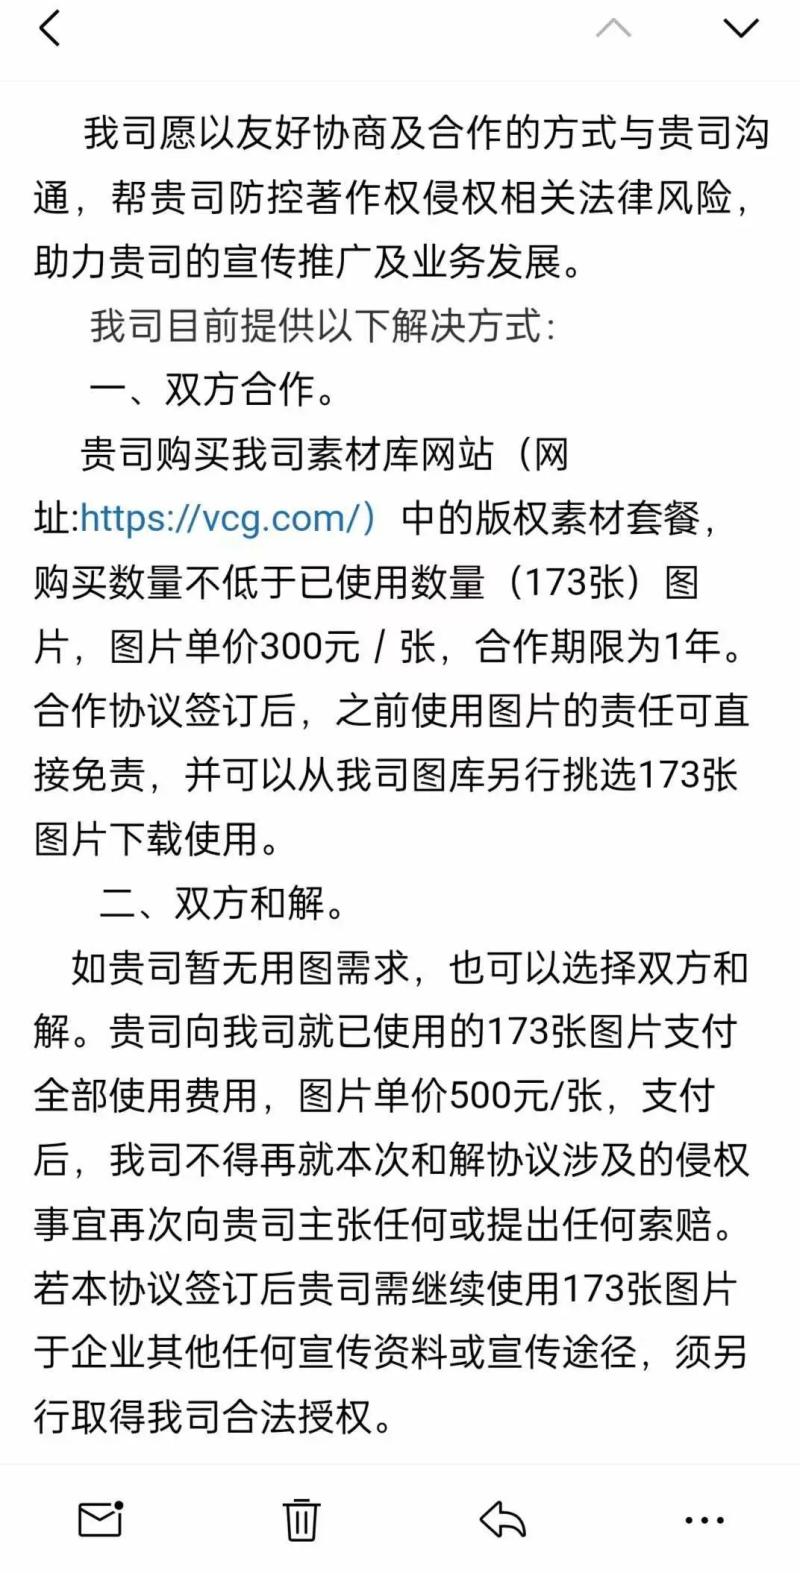 Claim over 80000 yuan! Visual China just responded that the photos they took were accused of infringing on Images | China | related | sales | authorization | involved | photographer | images